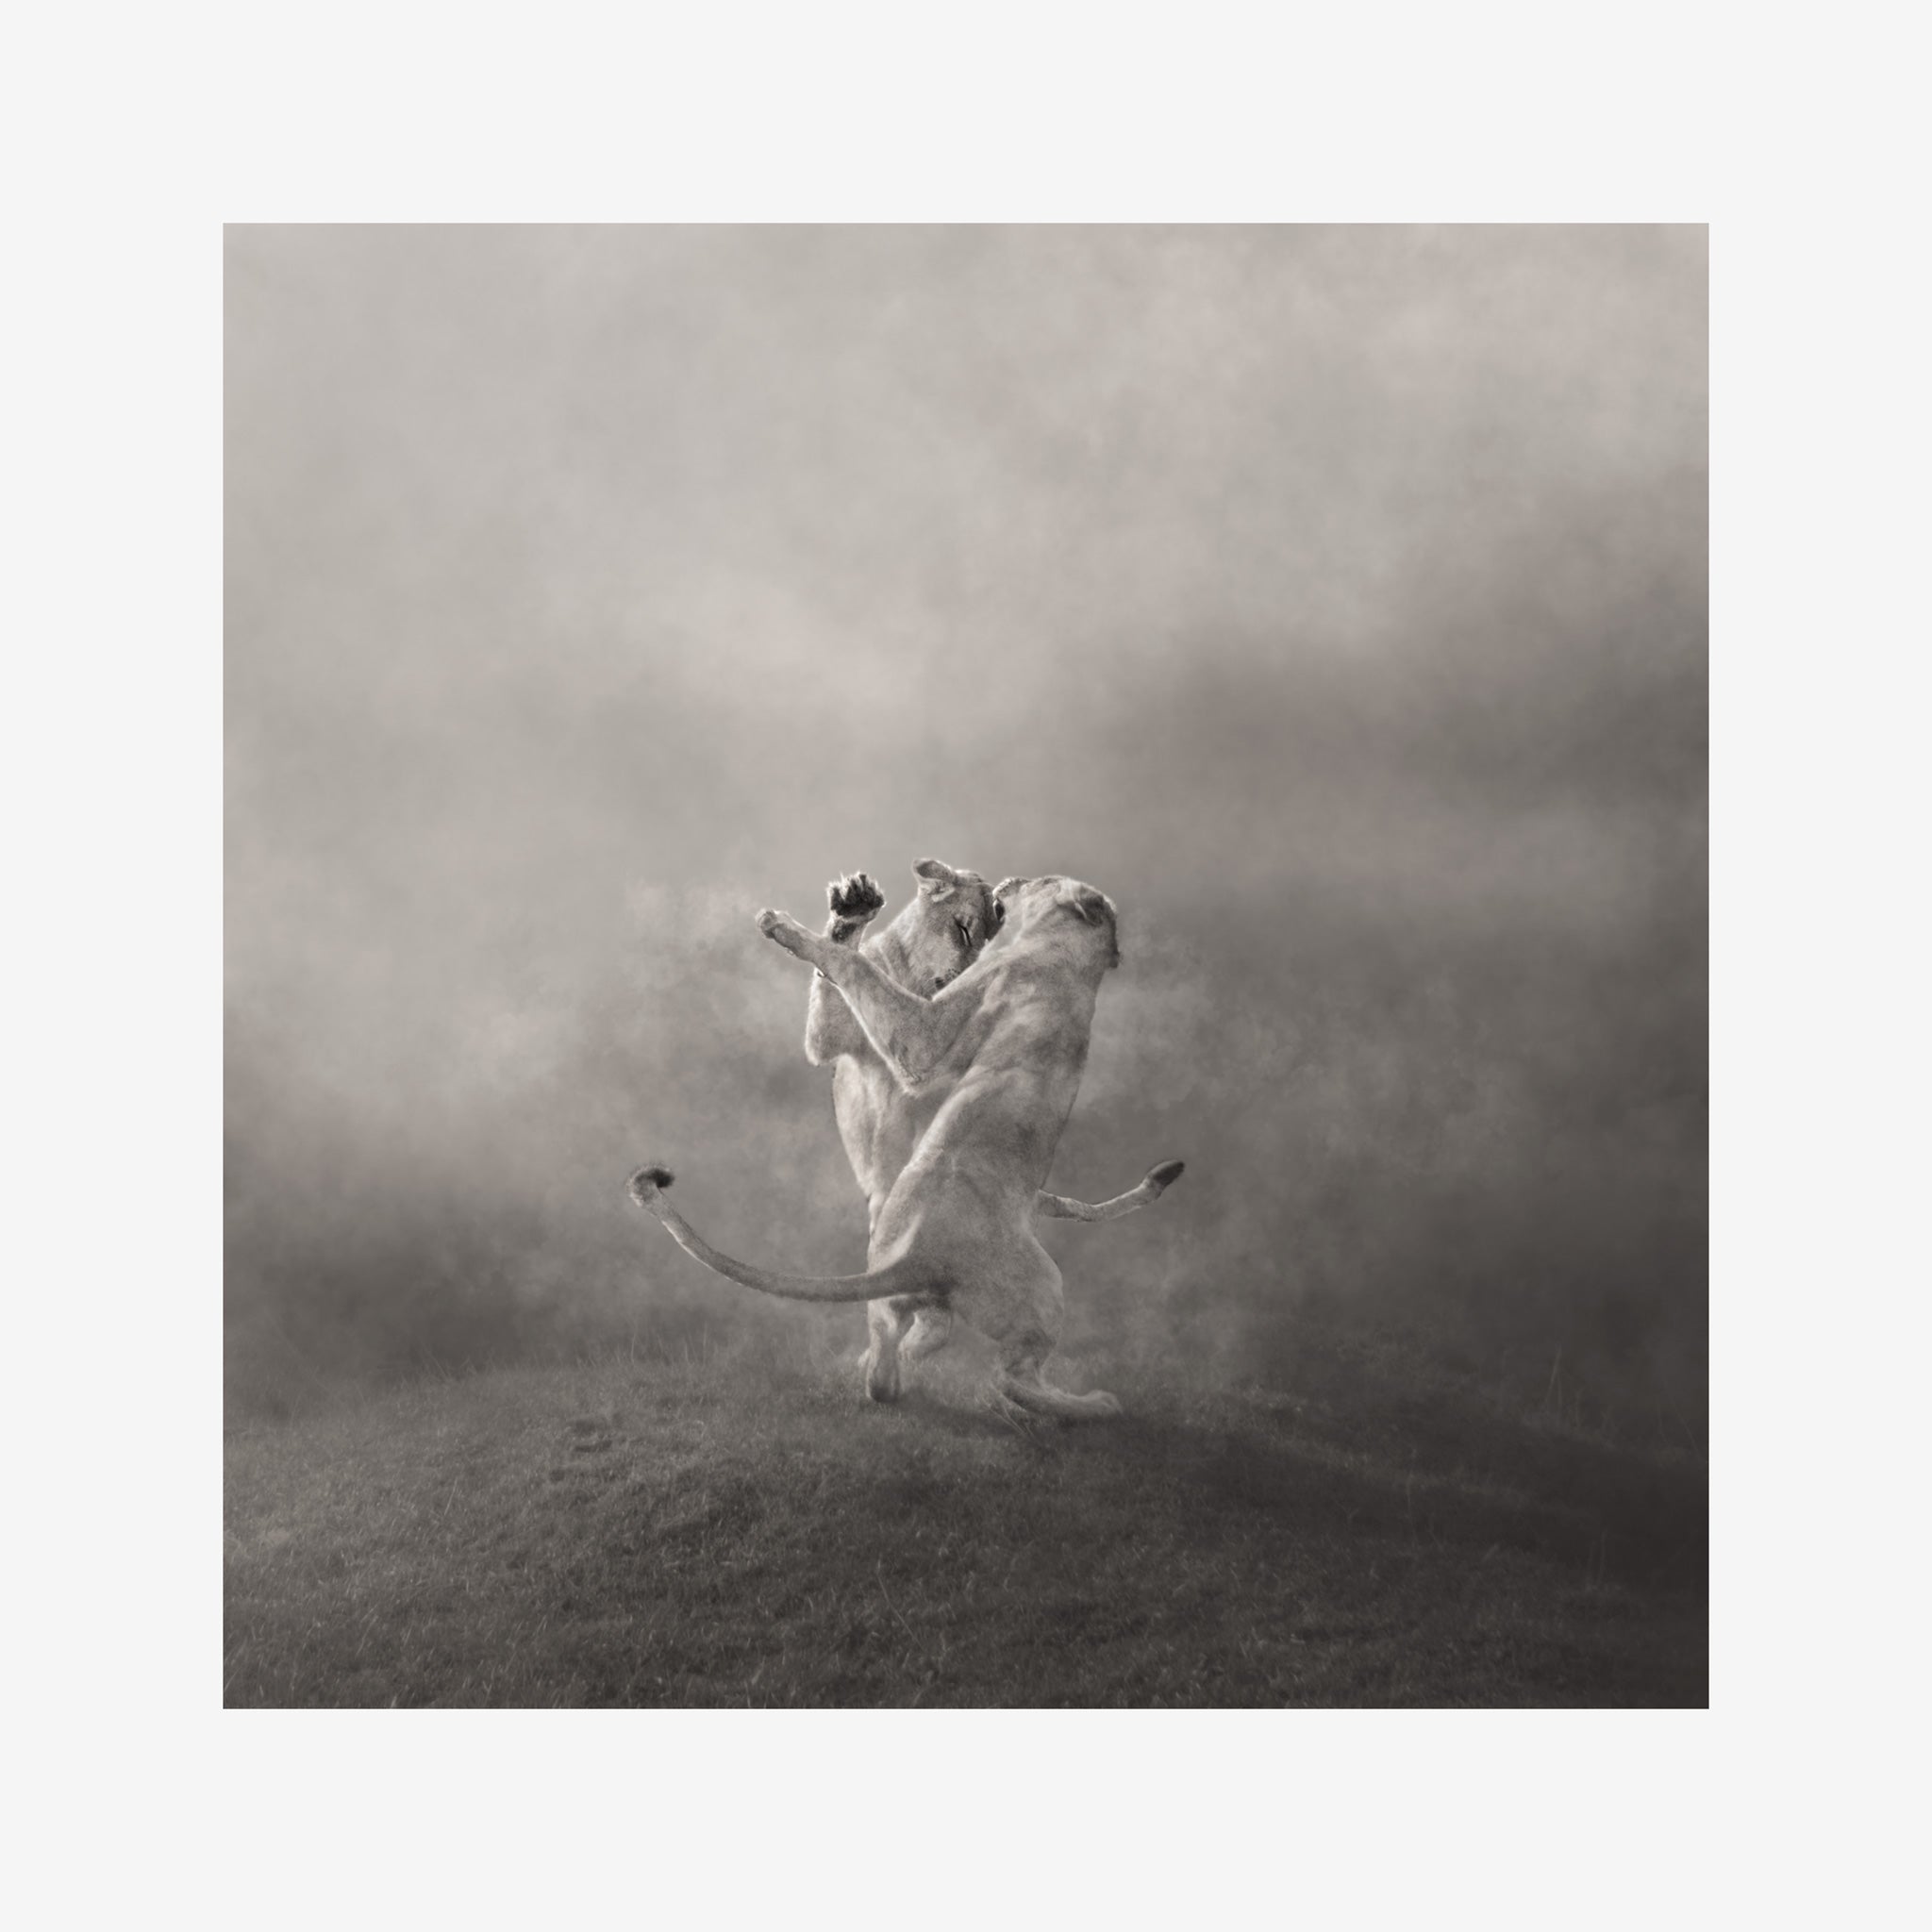 Lion Pictures | The Waring Self Print. Black and white image of Lions fighting in a hazy mist. Photographed by Belinda Robertson.